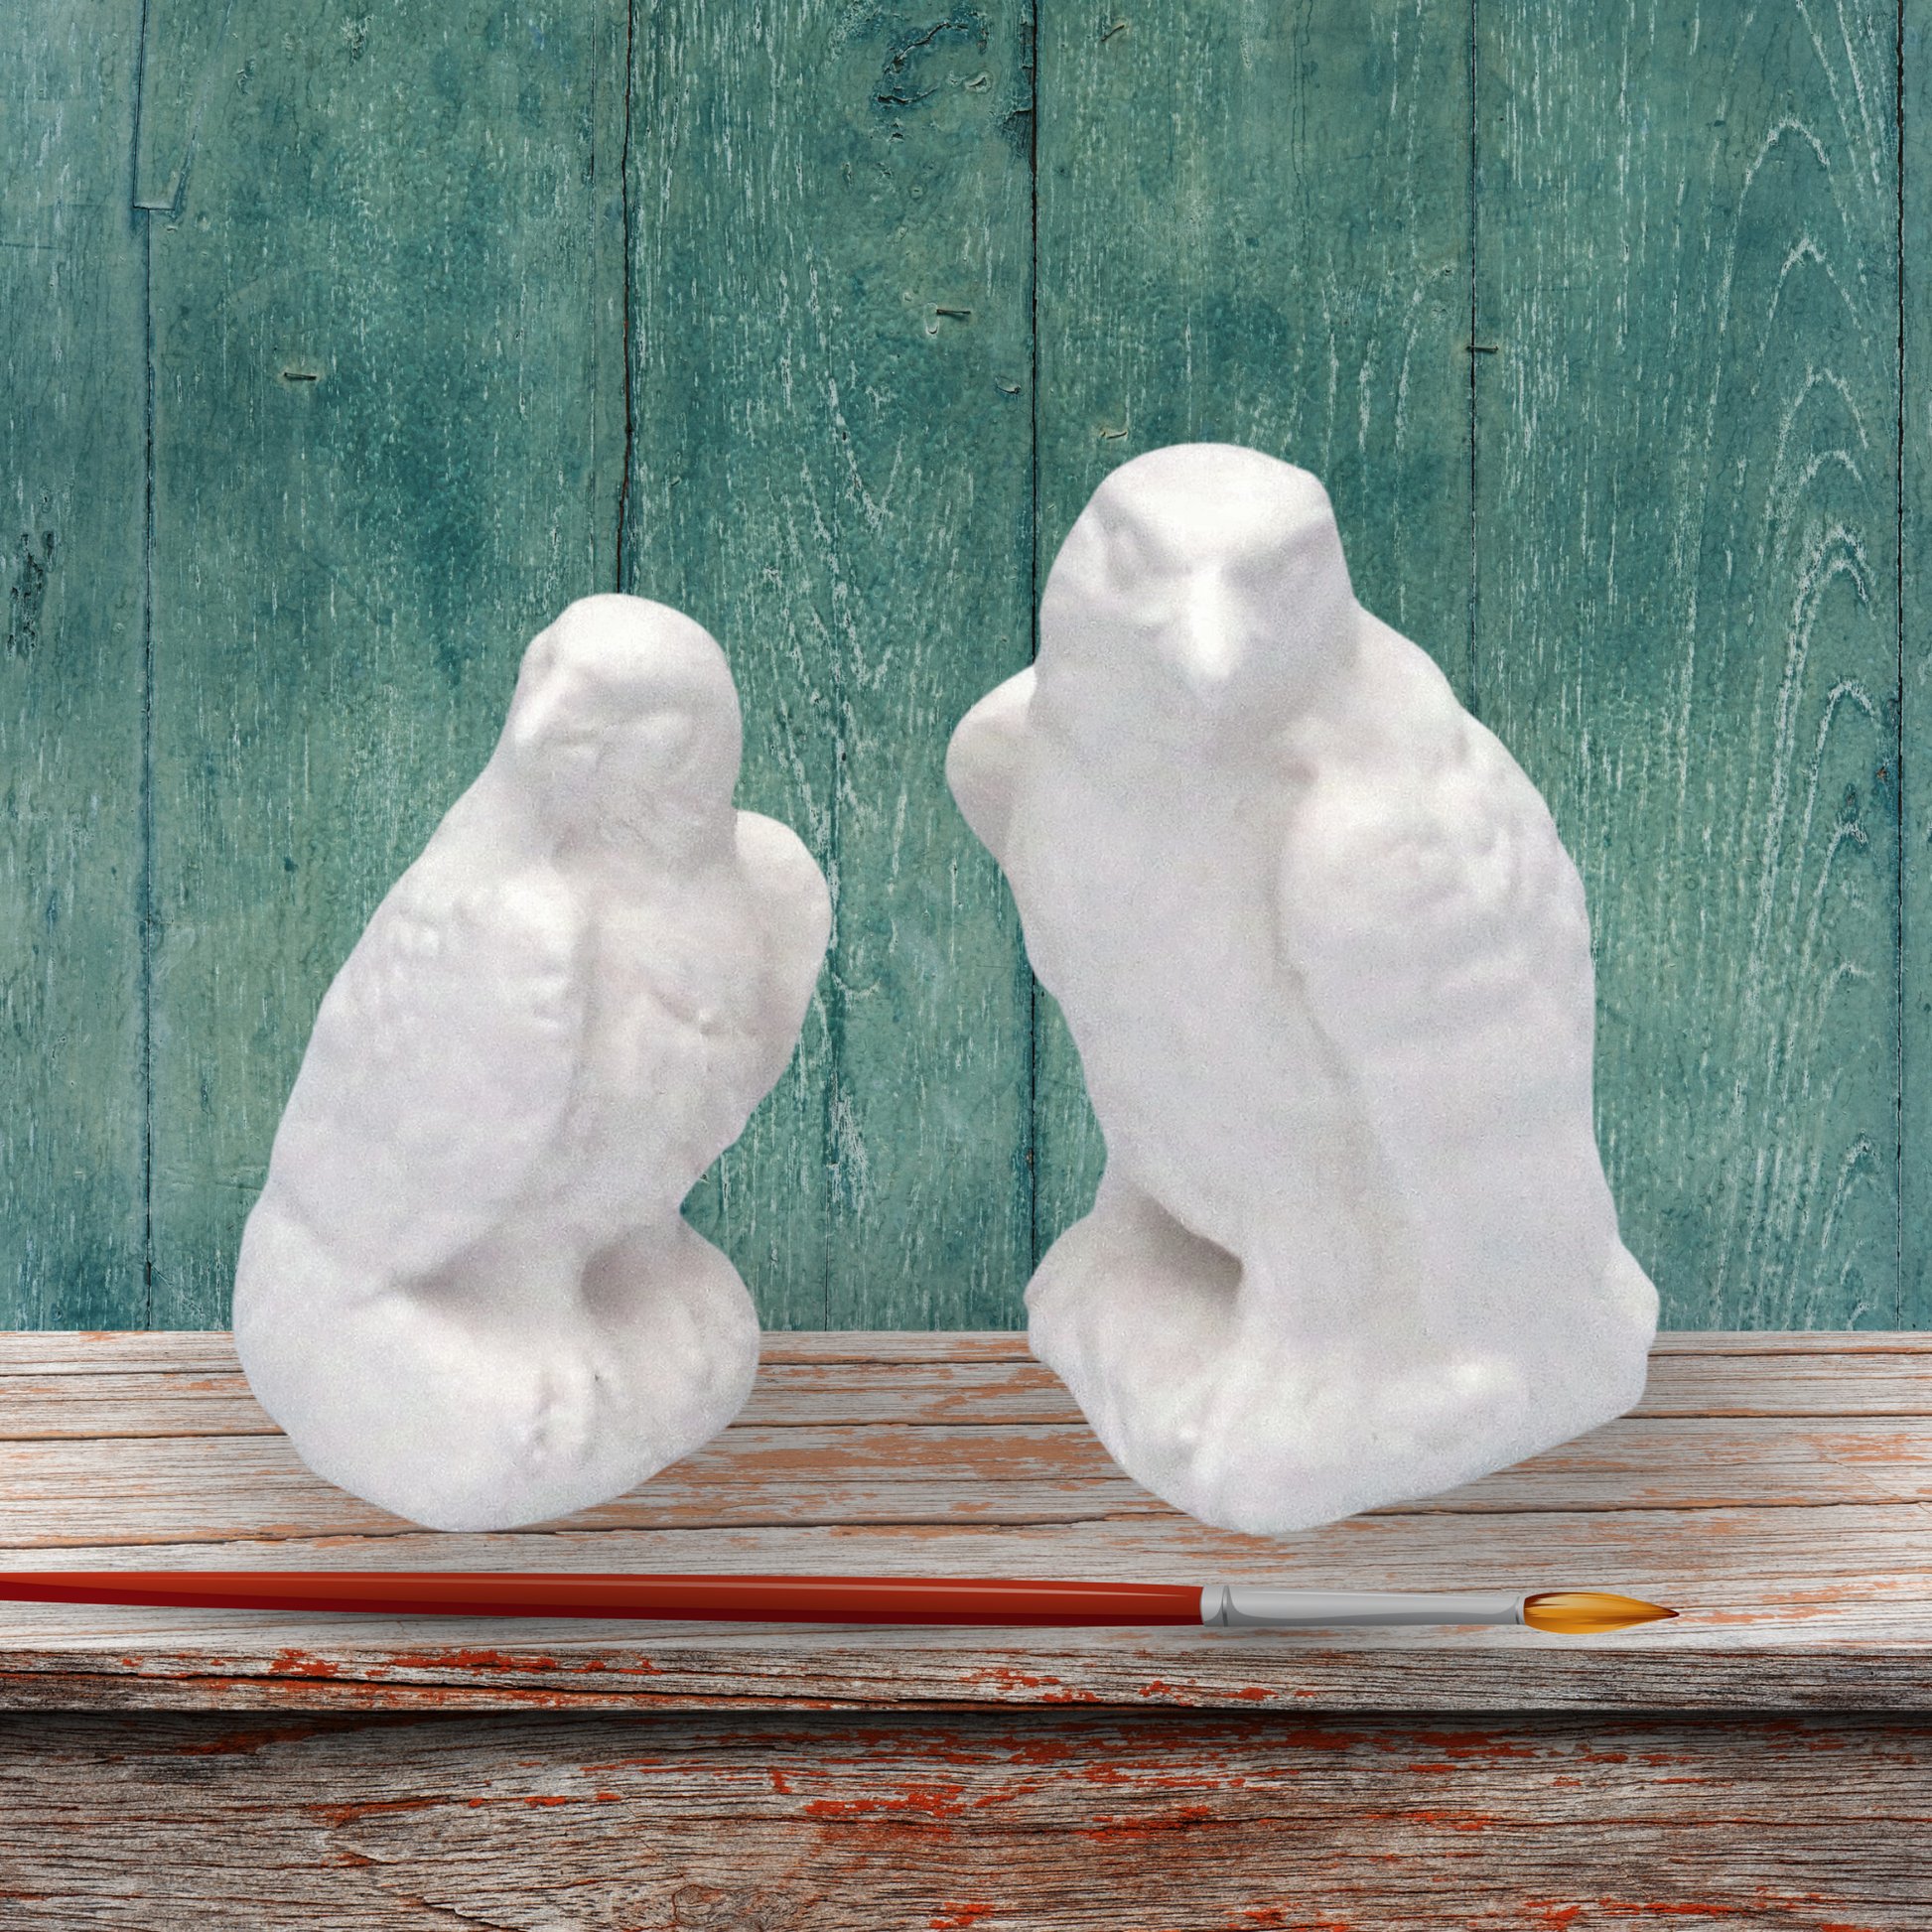 2 small unpainted eagle statues on a rustic wood table with green background and a paintbrush in front of them.